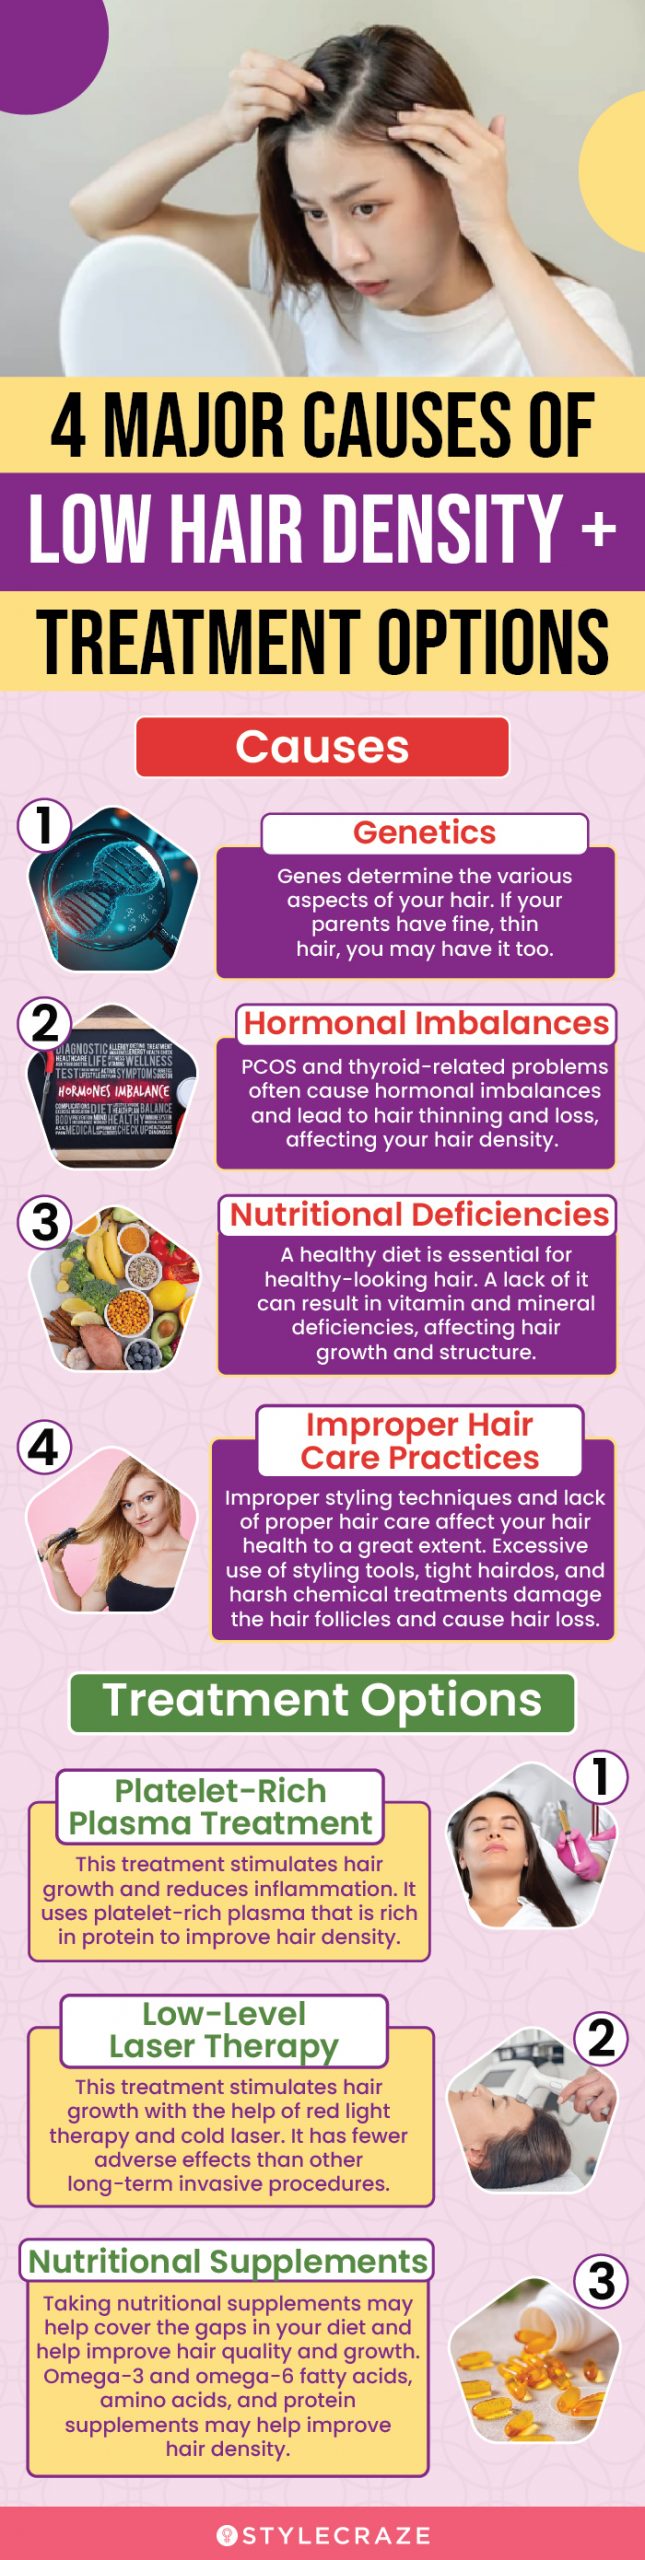 4 major causes of low hair density + treatment options (infographic)